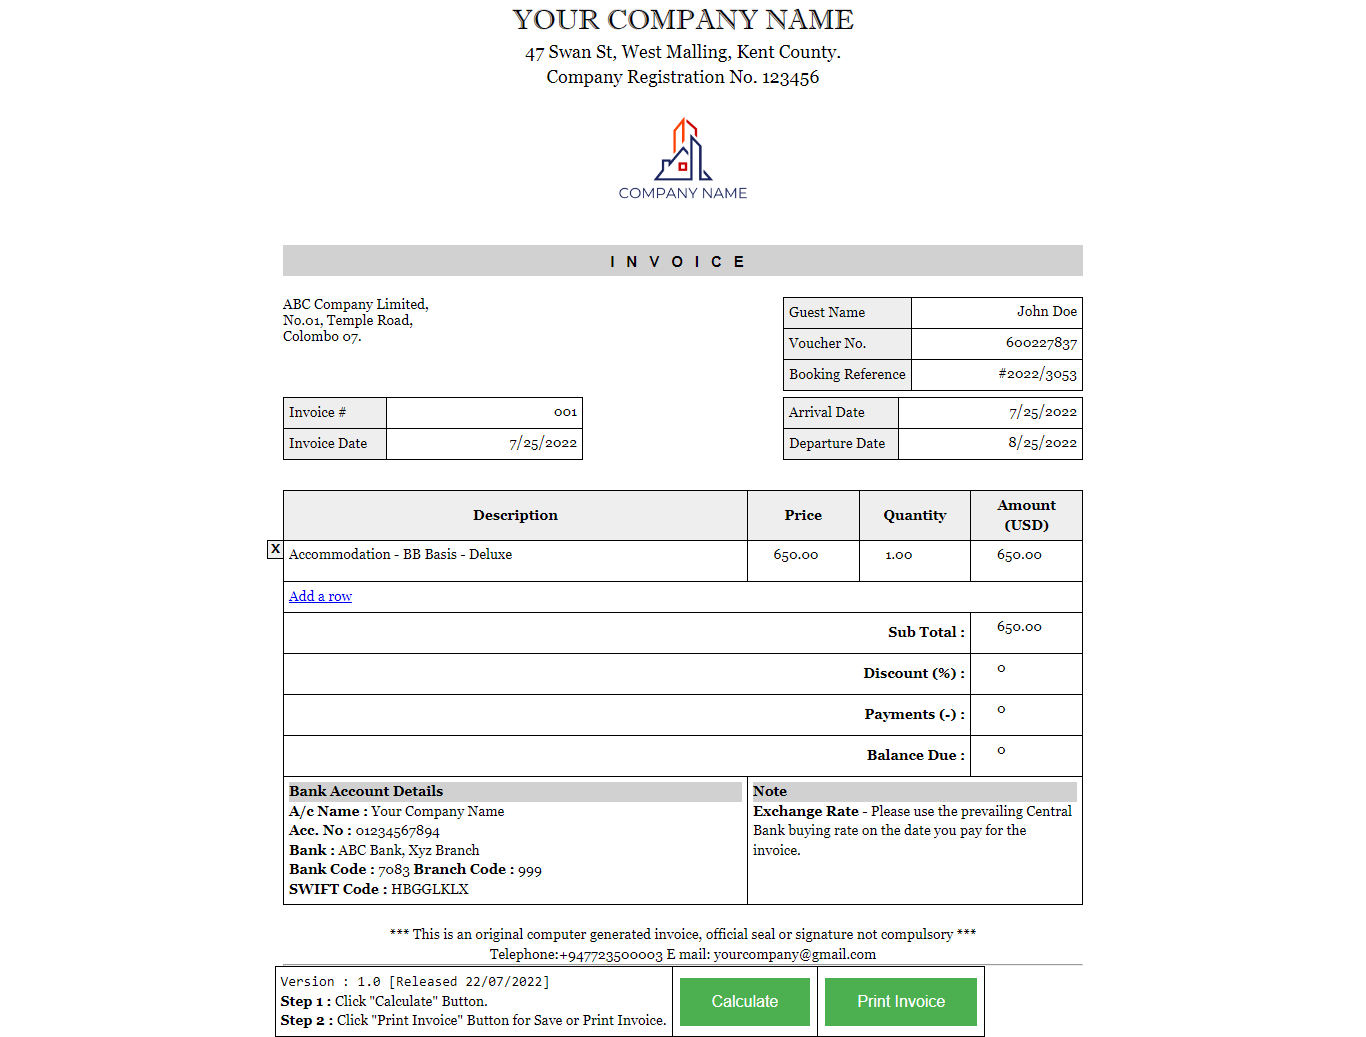 Simple Invoice Generator for your Business